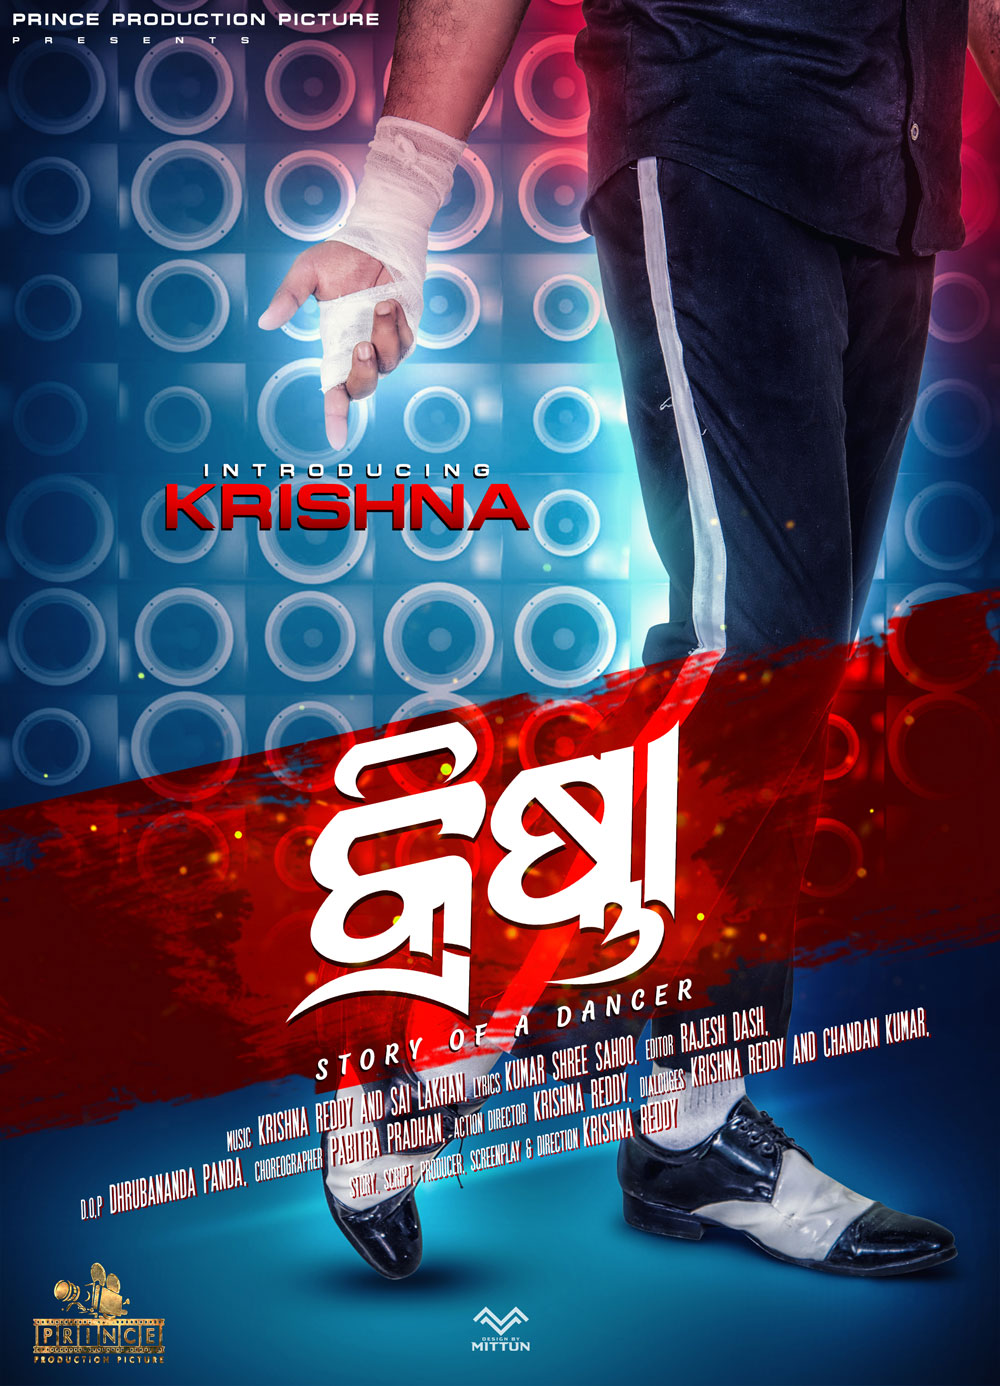 Krishna Odia Movie official Posters